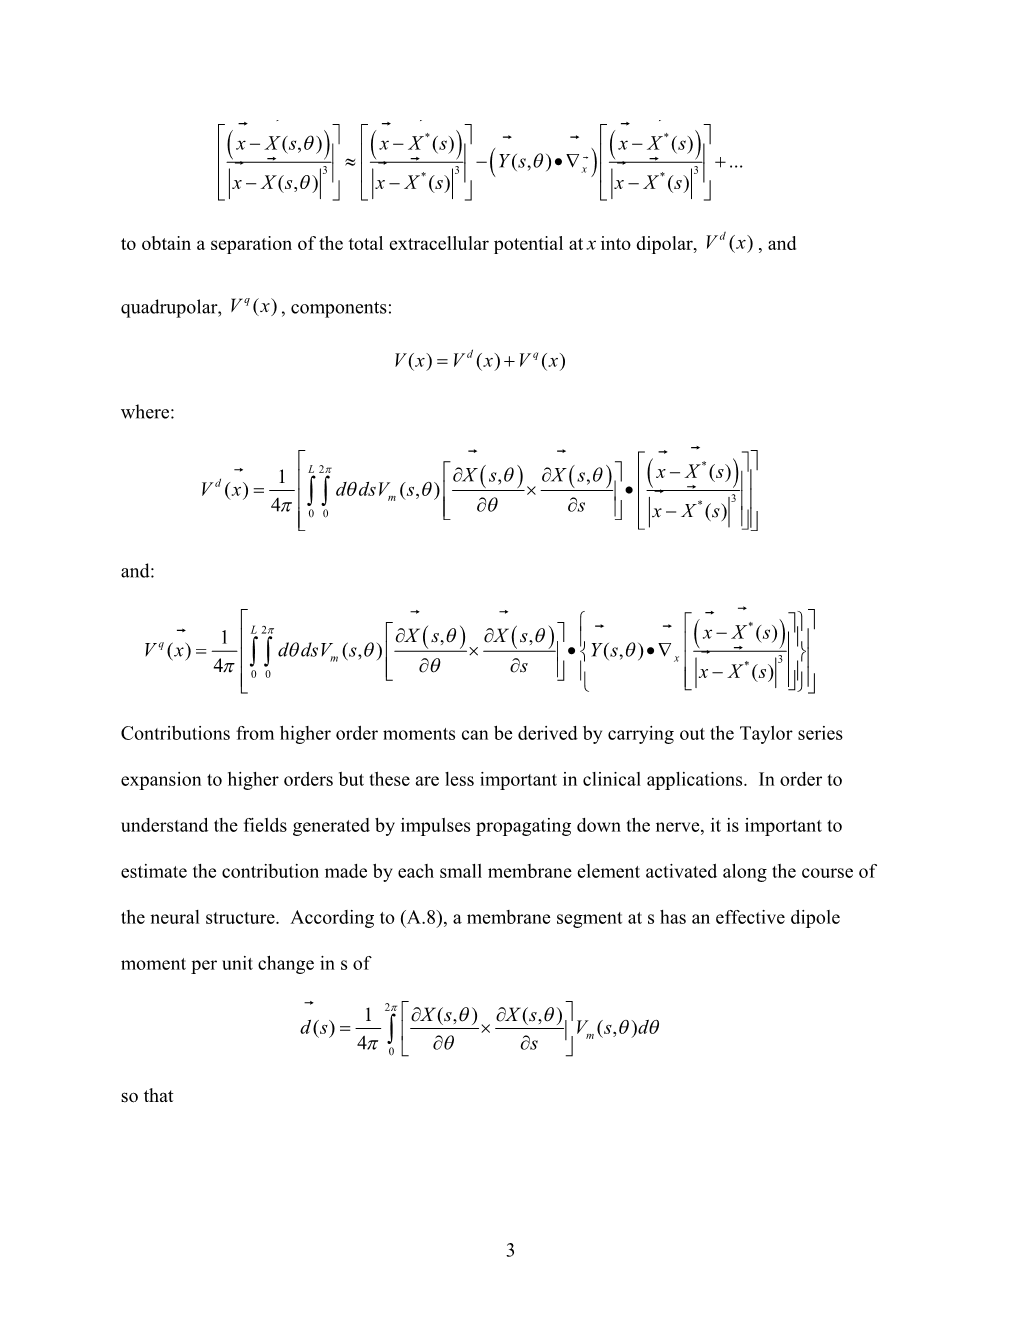 Appendix A: Derivation of Dipole Moment and Quadrupole Moments Associated with Membrane